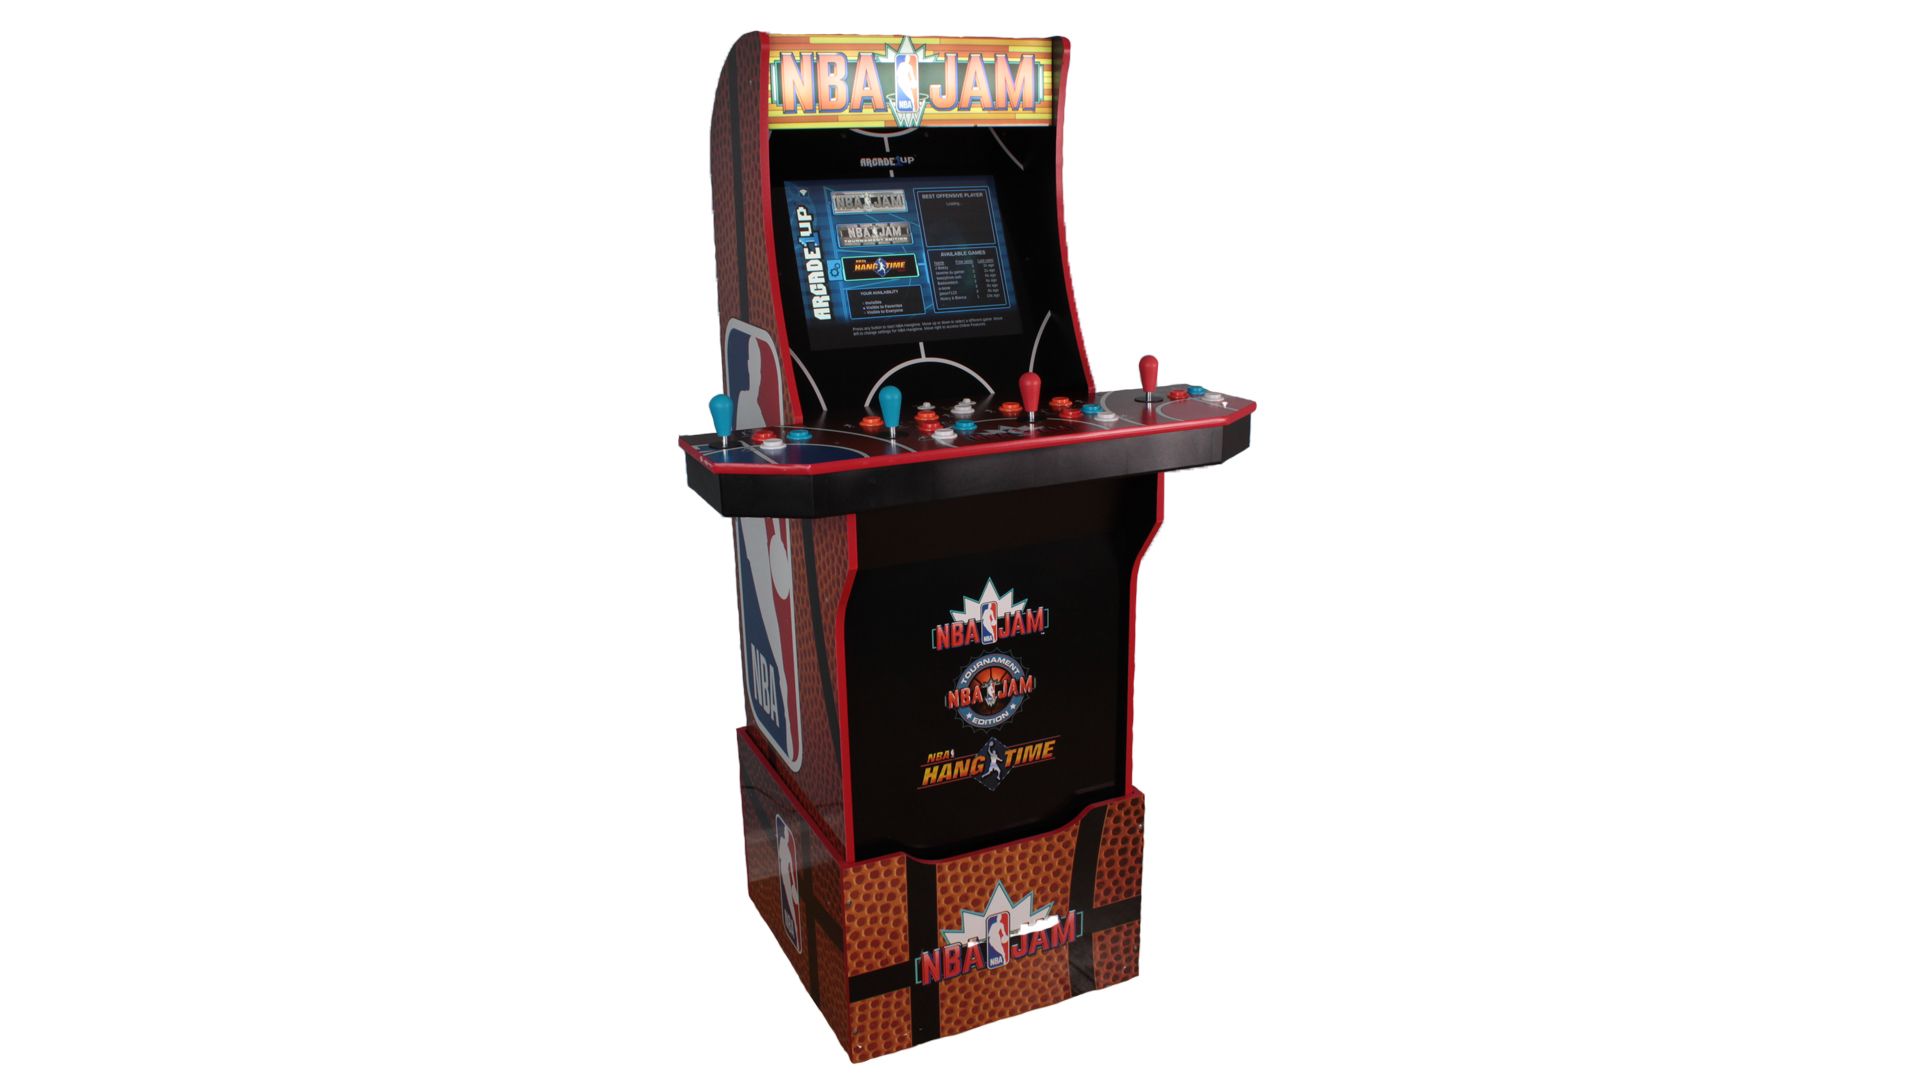 A profile view of the Arcade1Up NBA Jam machine